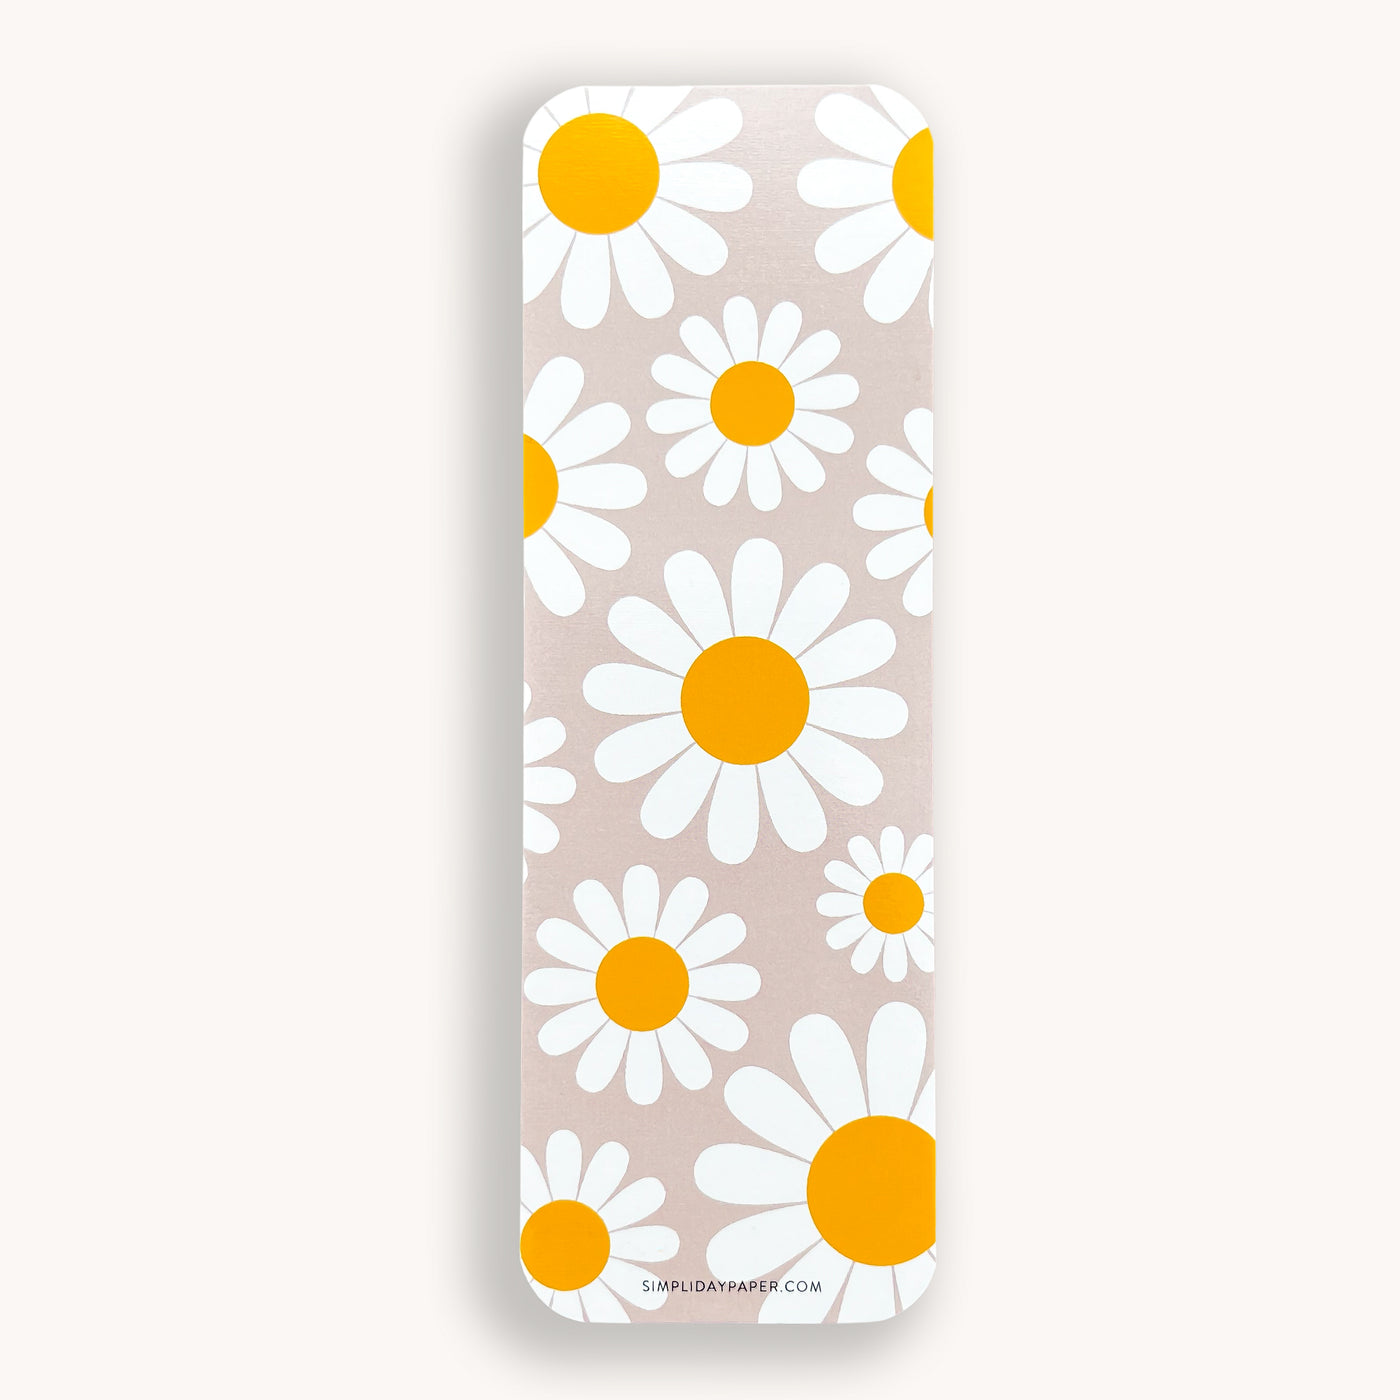 Daisies on a blush background bookmark with rounded corners by Simpliday Paper, Olga Nagorna.